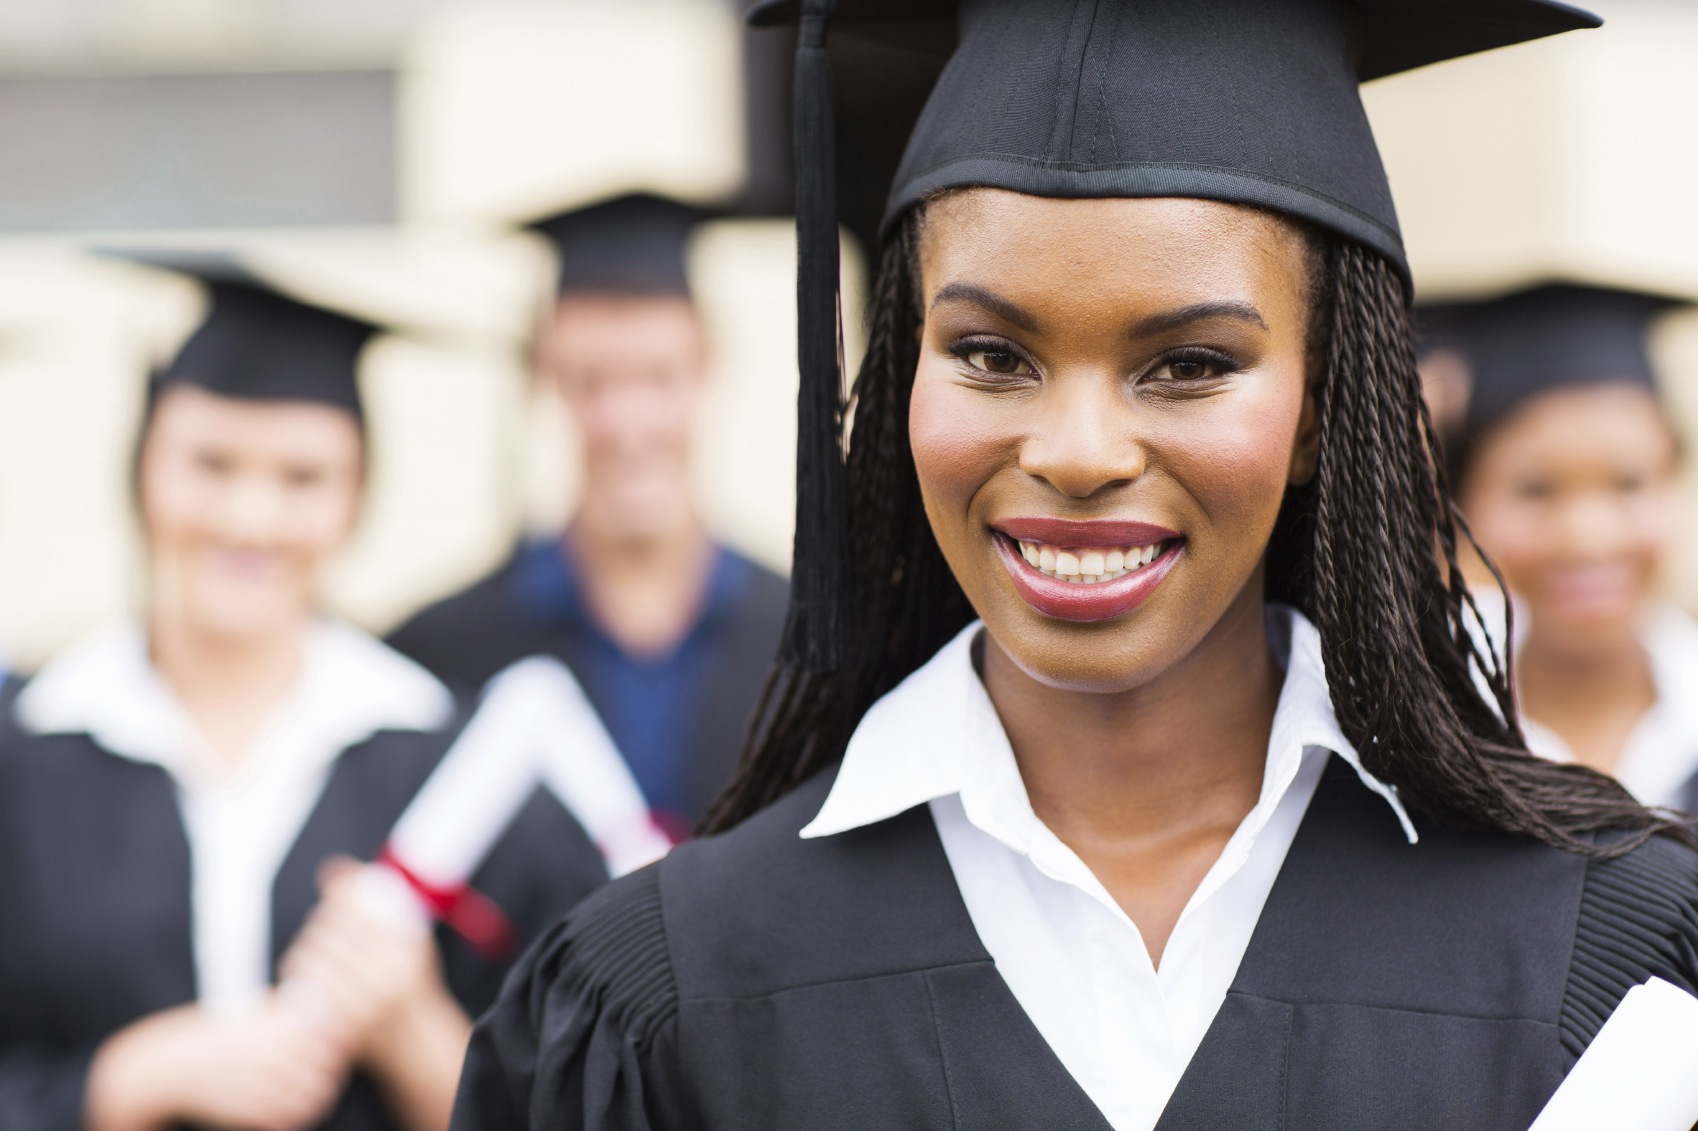 colleges-in-kentucky-struggling-to-boost-graduation-rates-for-black